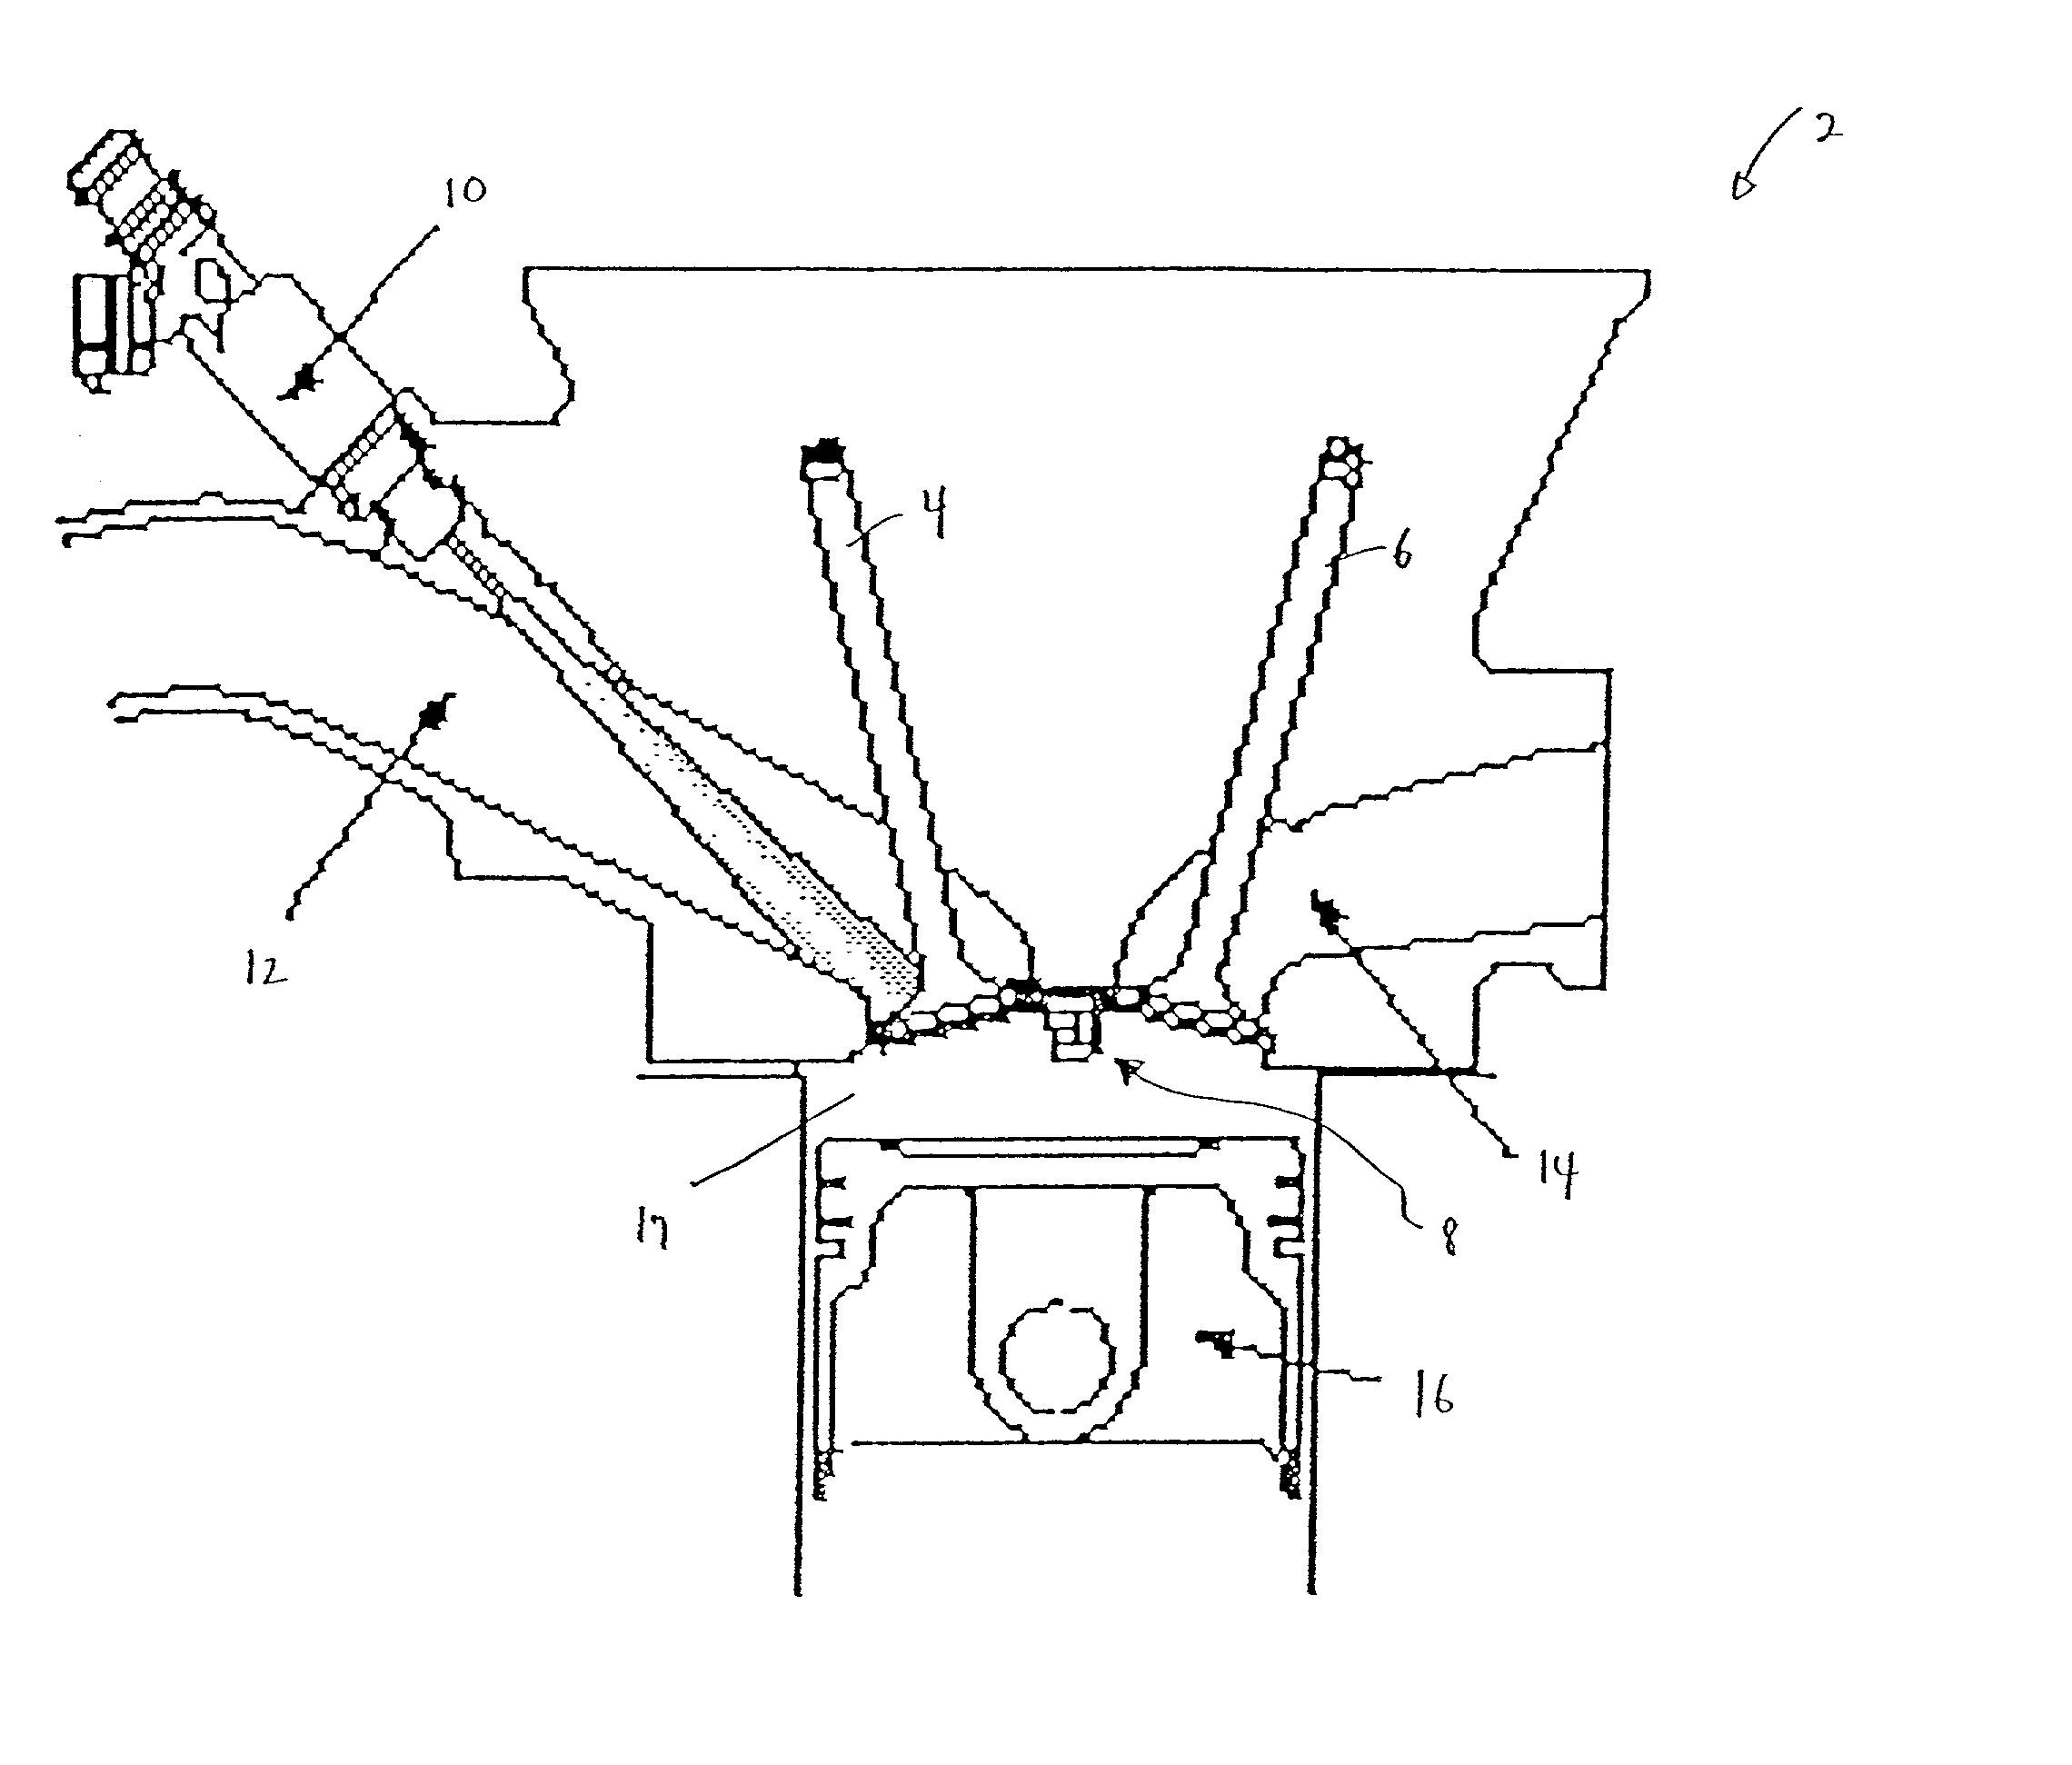 Methods and apparatuses for laser ignited engines